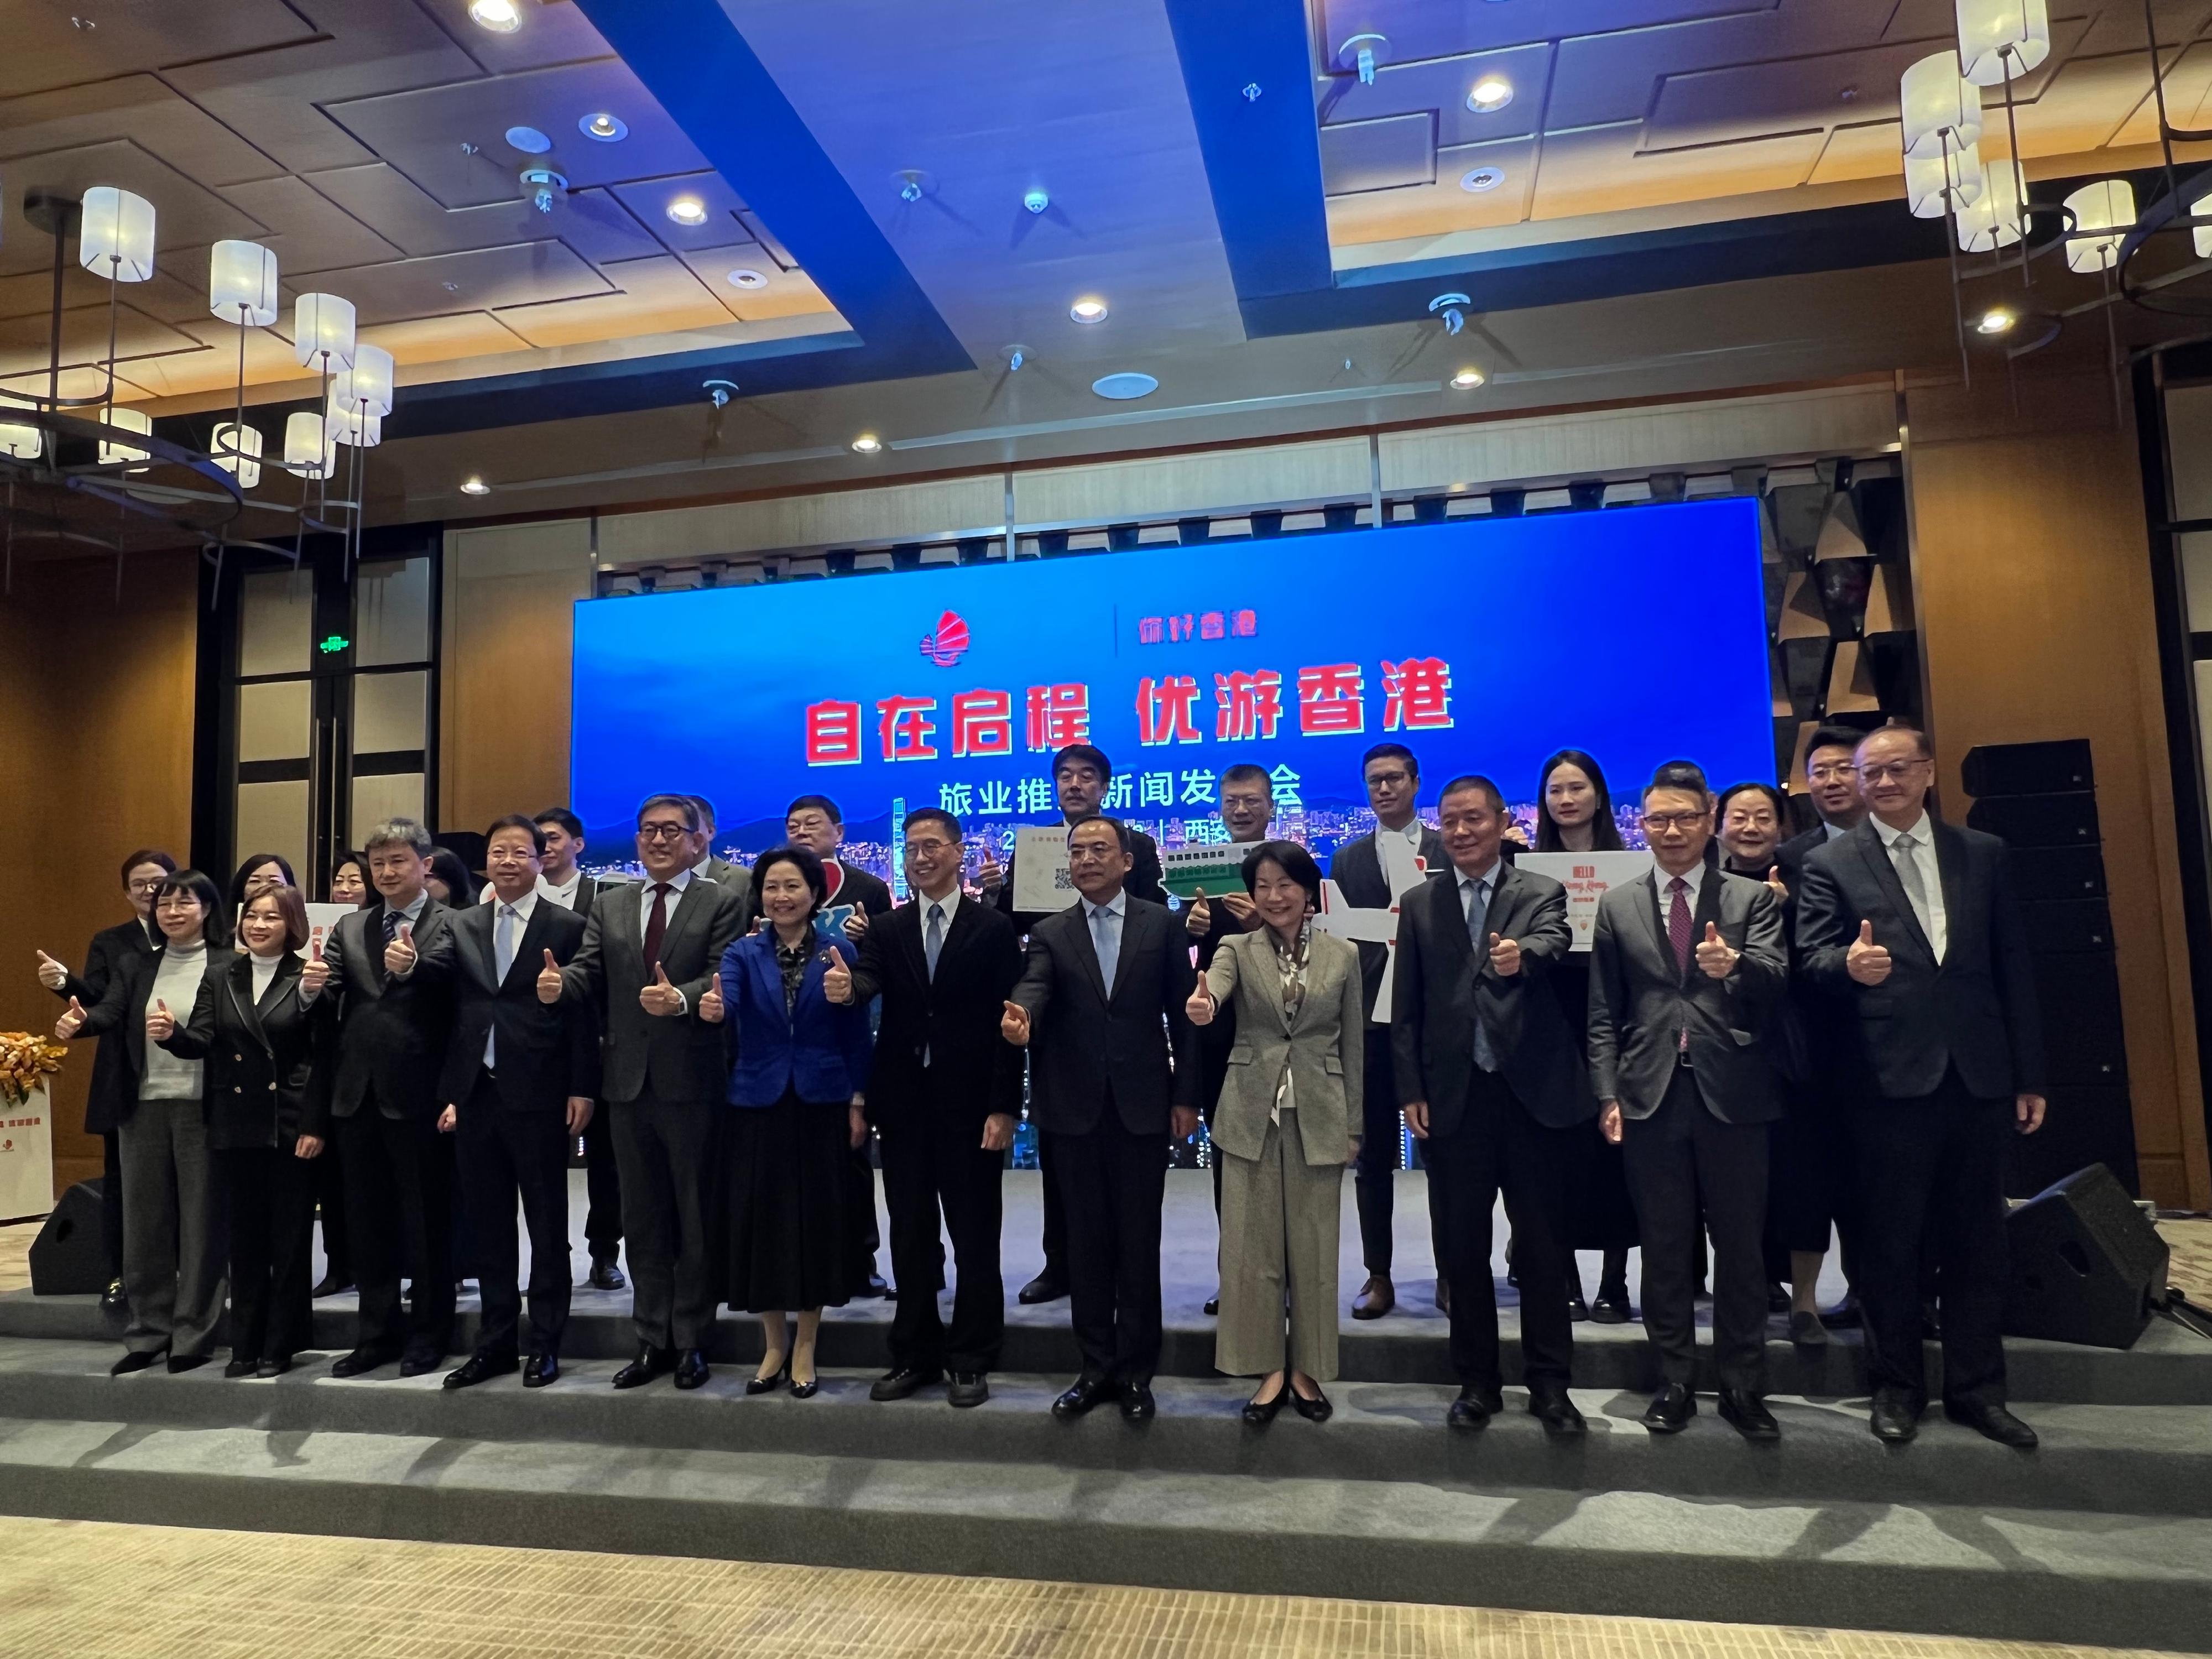 The Secretary for Culture, Sports and Tourism, Mr Kevin Yeung (front row, sixth right), visited Xi'an and Qingdao to promote Hong Kong tourism. On the second day of the visit (March 13), he attends a briefing session for the tourism sector in Xi'an, where he promoted Hong Kong tourism. The Commissioner for Tourism, Ms Vivian Sum (front row, fourth right), also attends.
